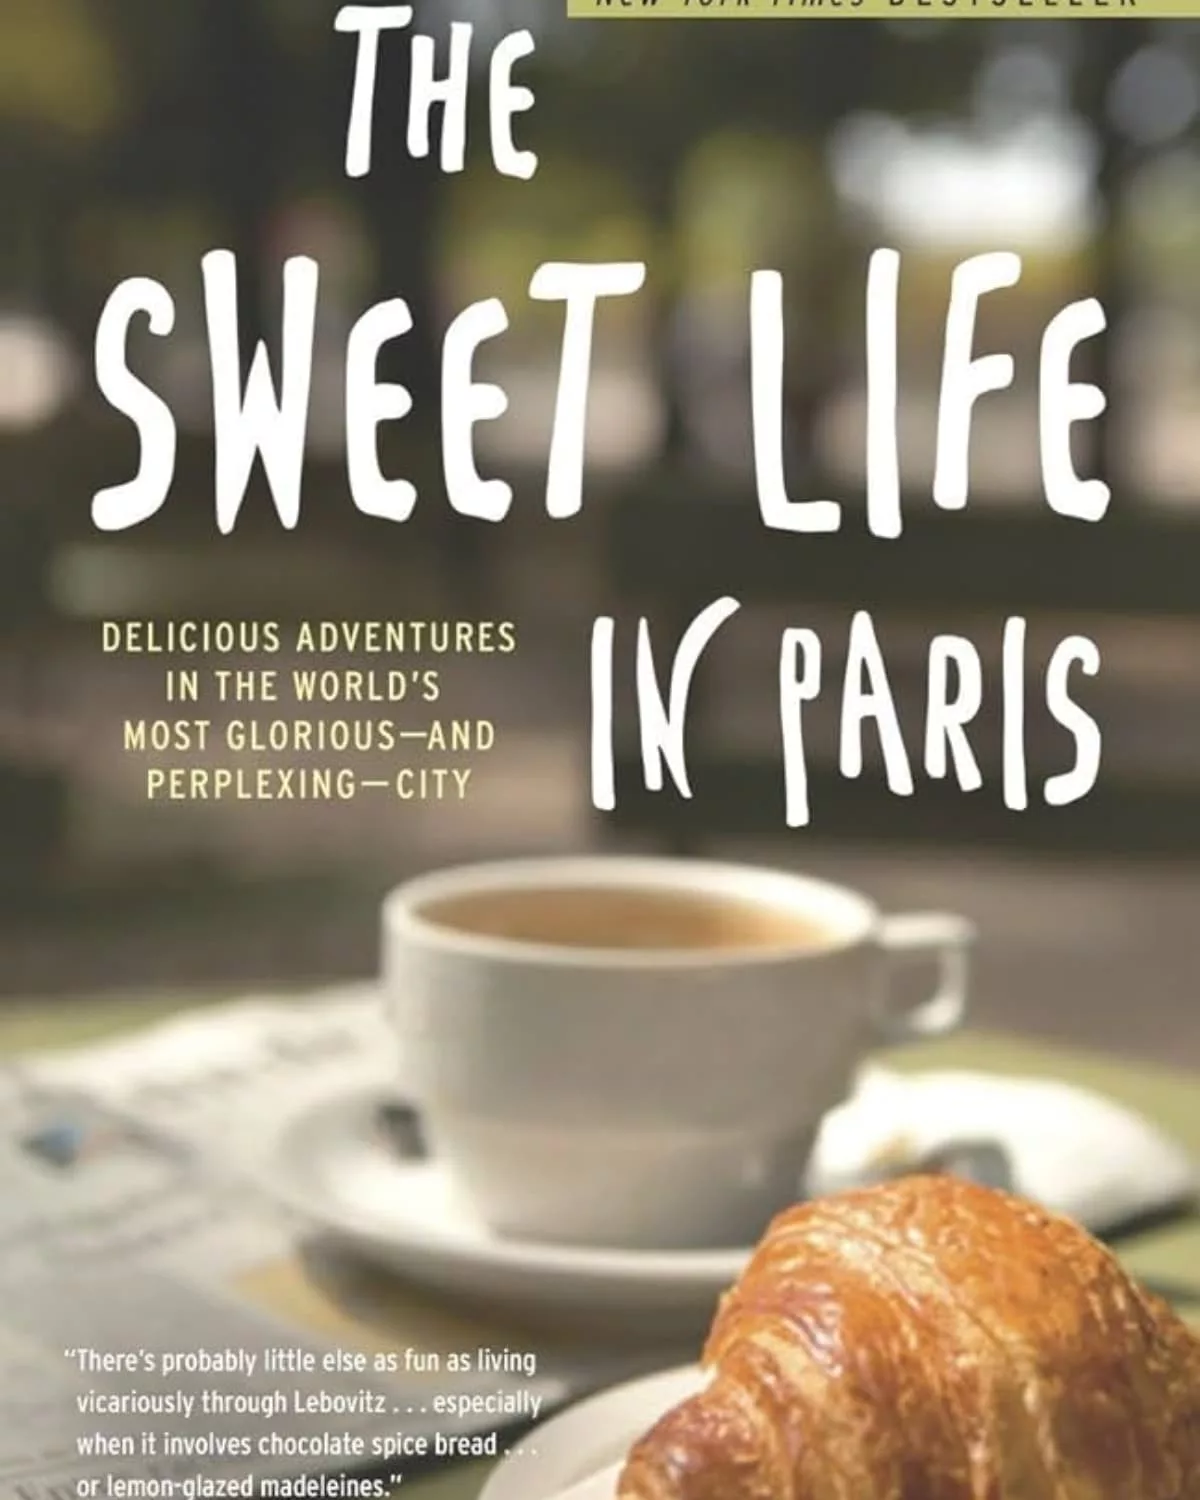 The Sweet Life in Paris David Lebovitz book cover with coffee and croissant